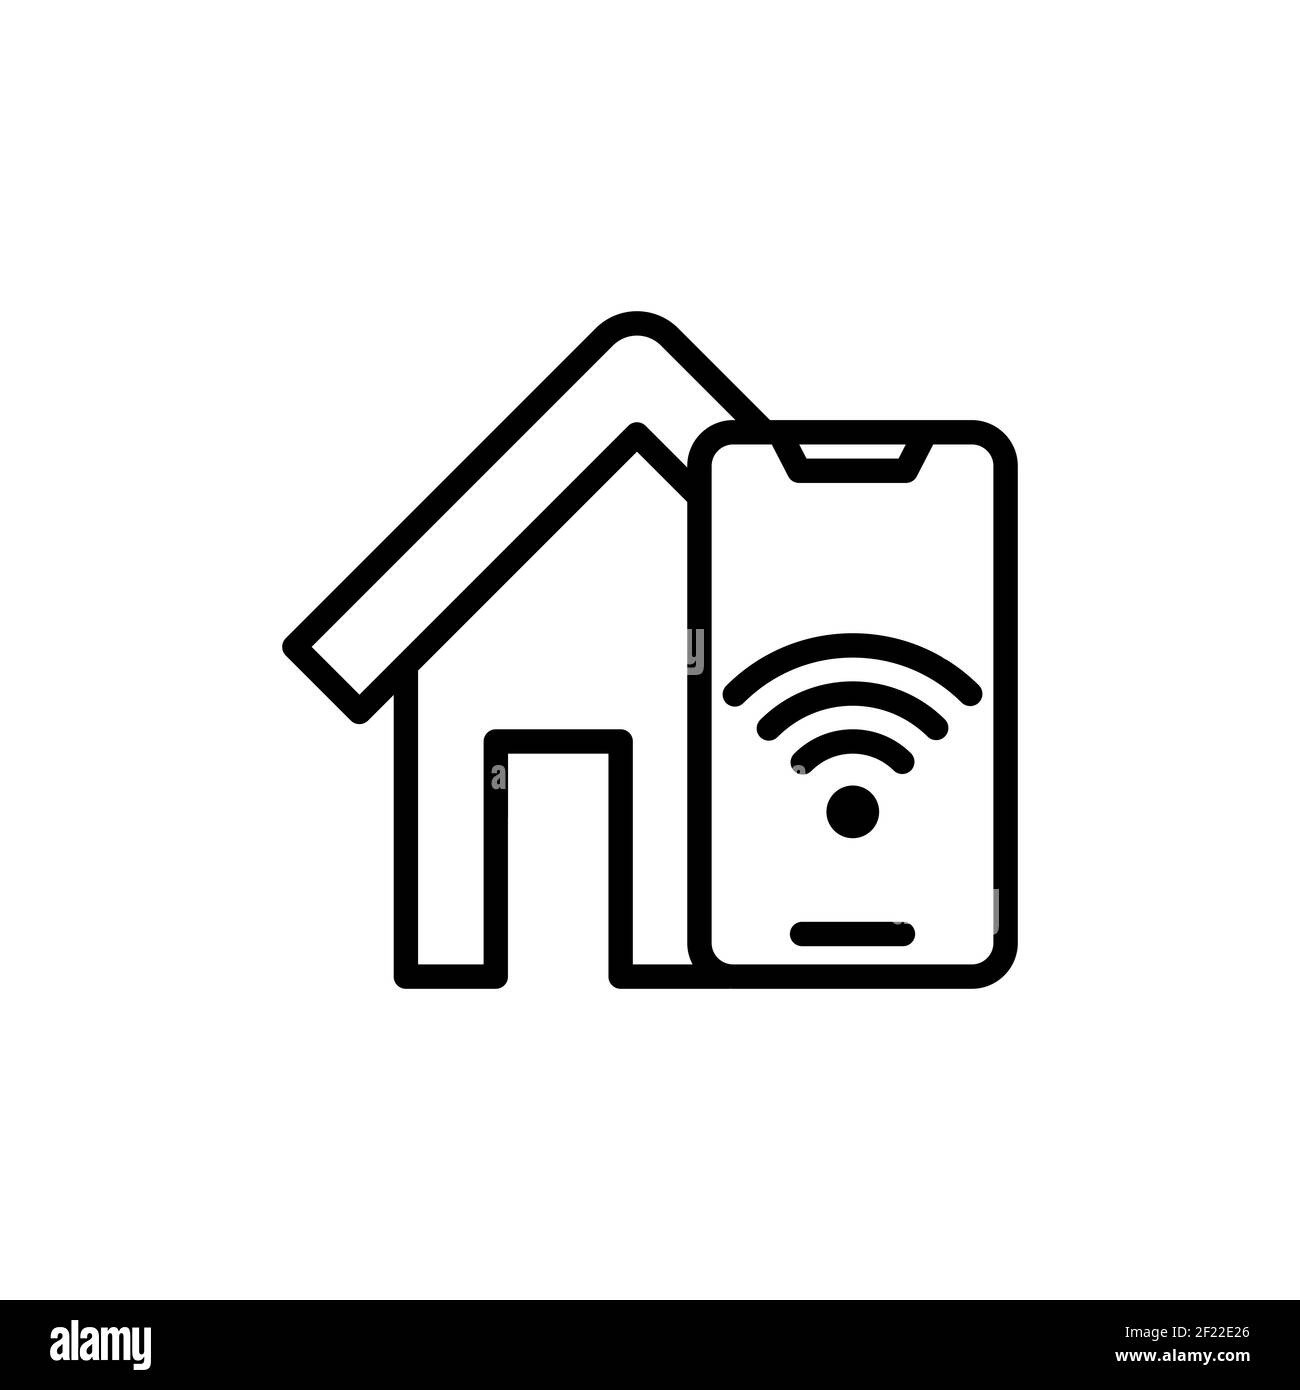 Smart Home Connection Icon Logo Vector design illustration. Smart home logo icon with wireless connection concept. Trendy Smart House vector icon flat Stock Vector